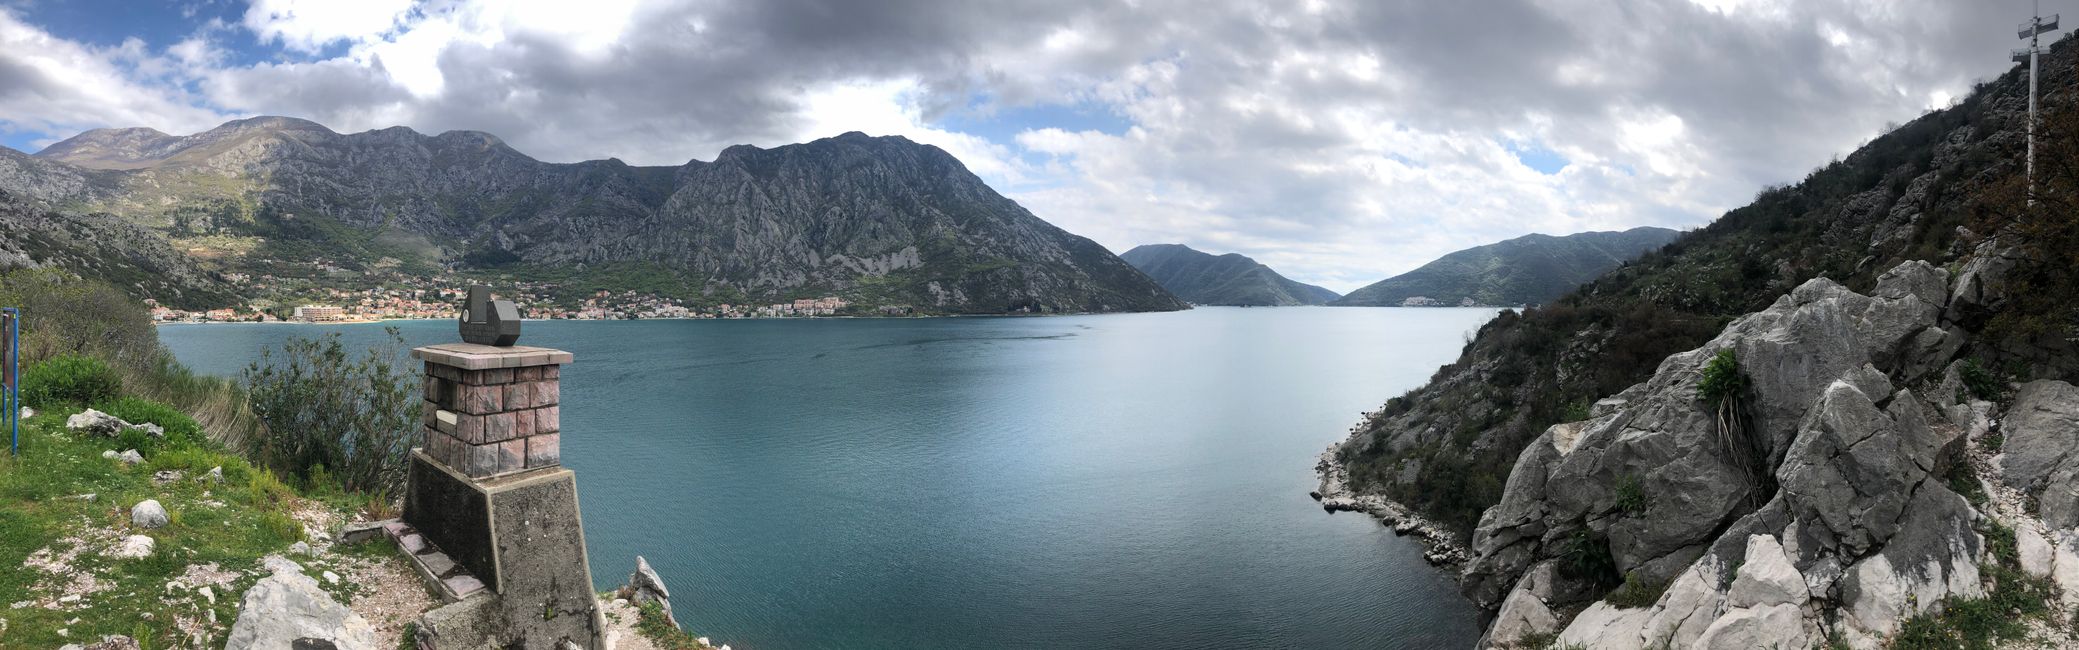 The landscape of Montenegro is beautiful!